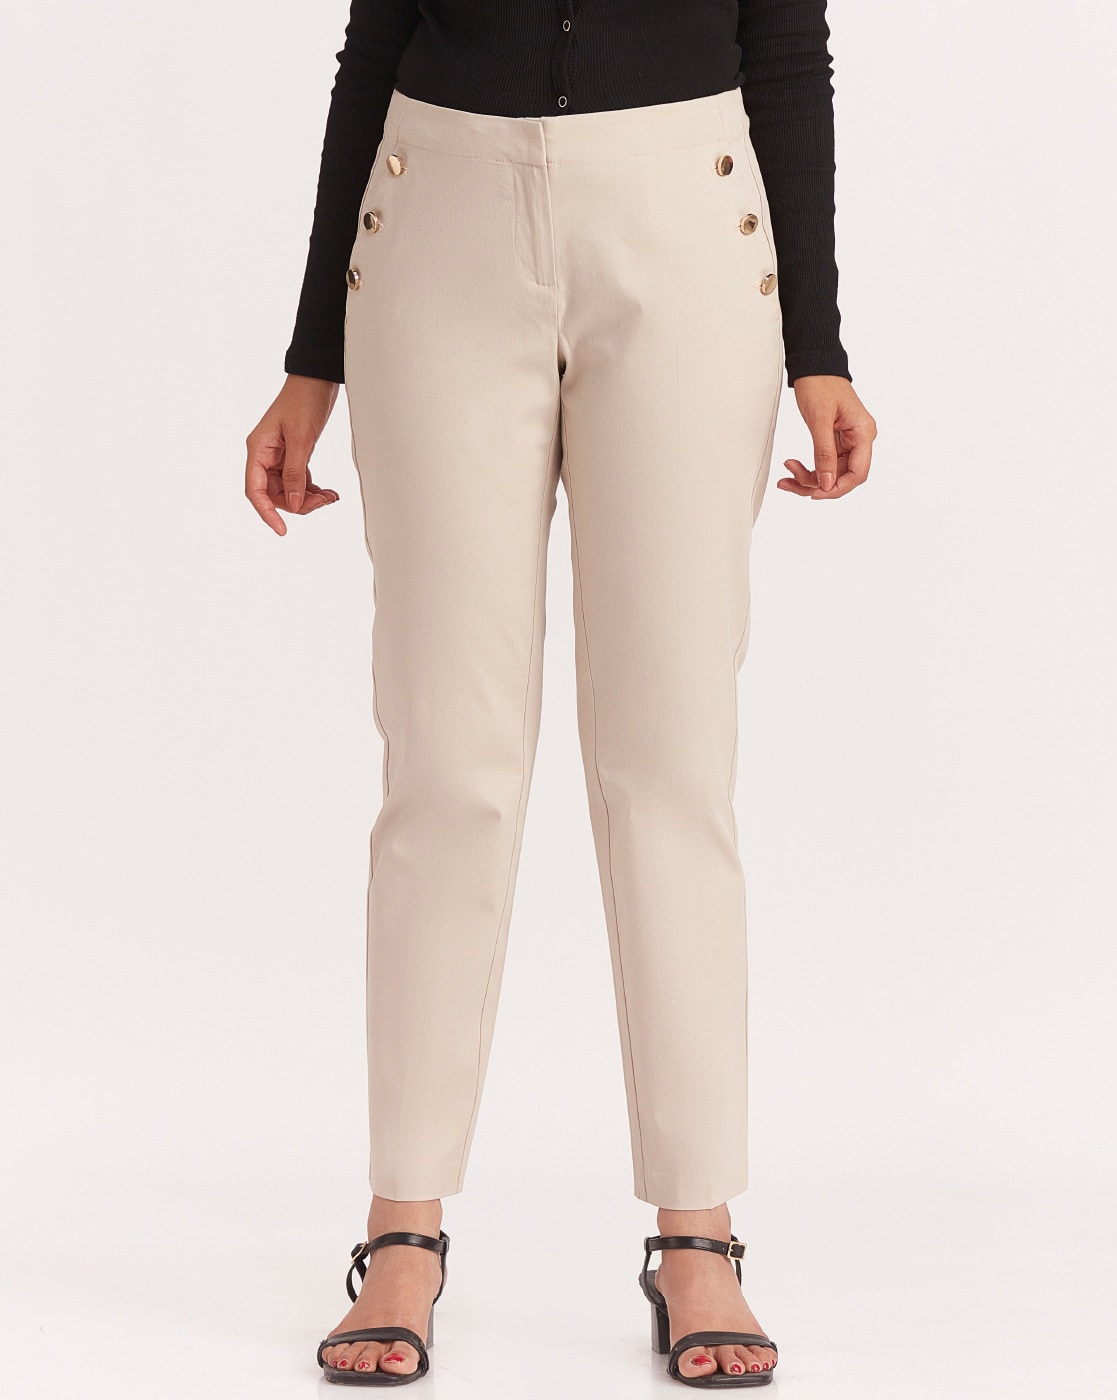 Stacey Solomon Cream Paperbag Waist Tapered Trouser  In The Style